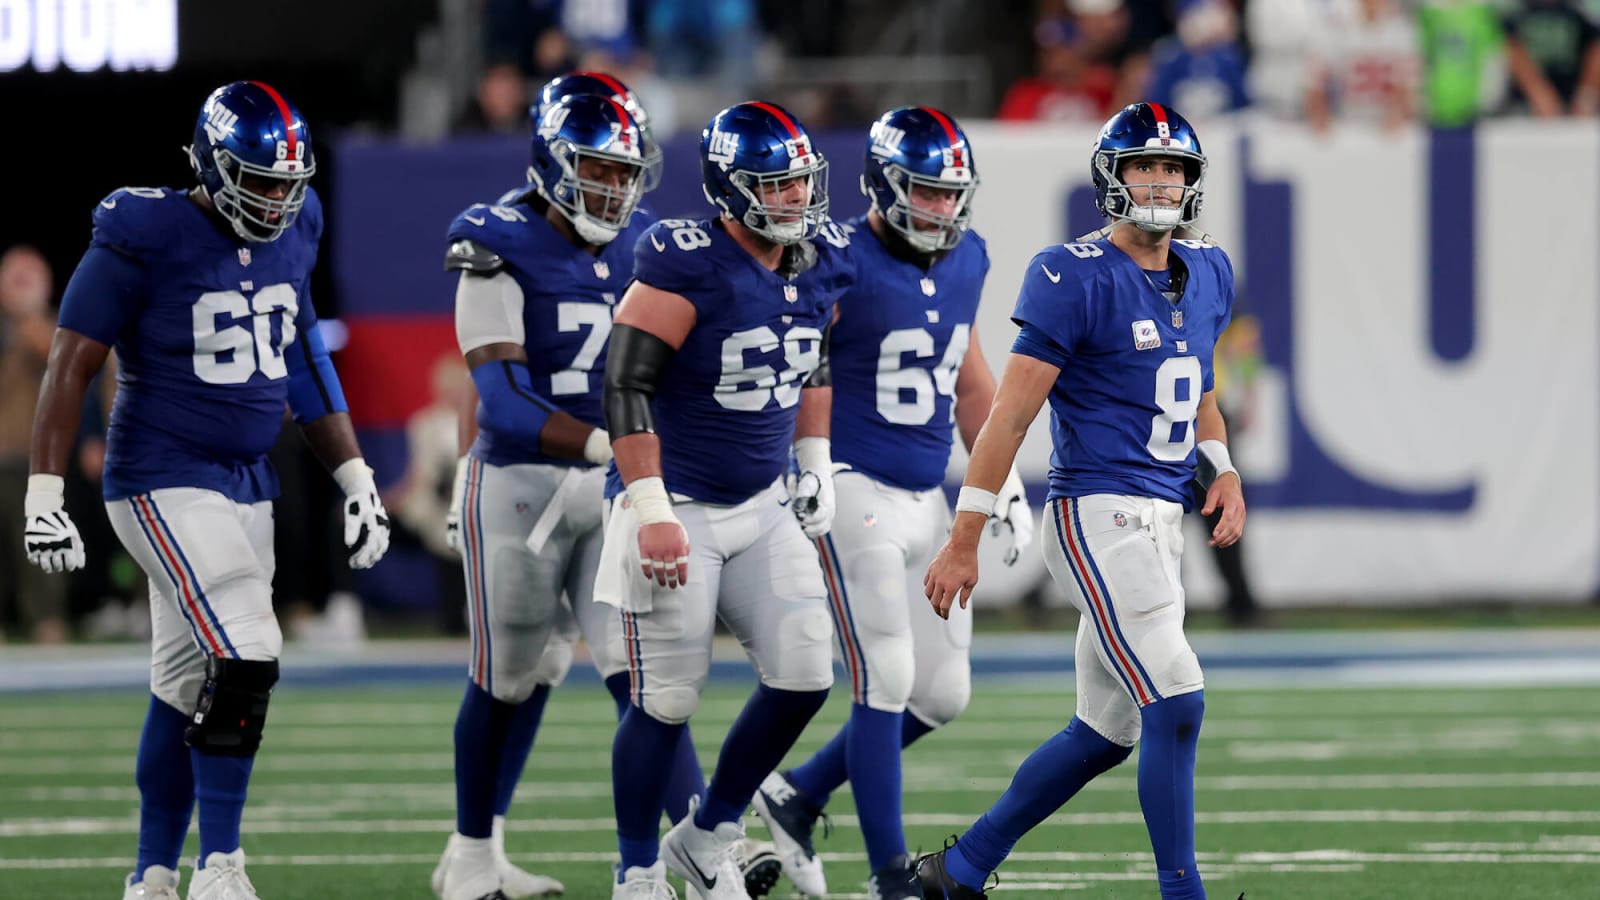 Giants young offensive lineman shouldering unnecessary blame for offense’s struggles this season